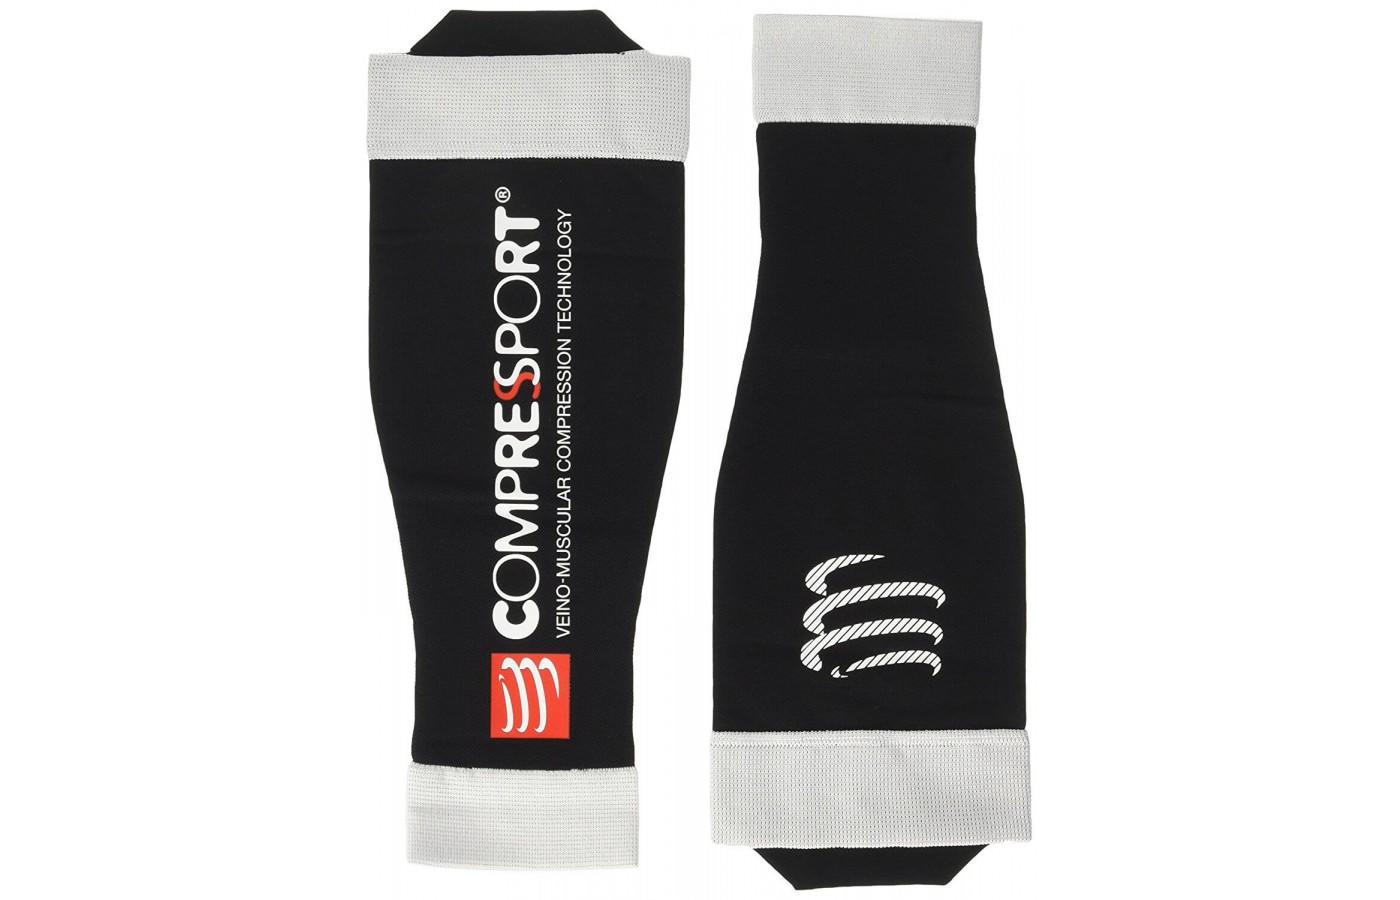 The Compresssport Calf Sleeves come in four sizes